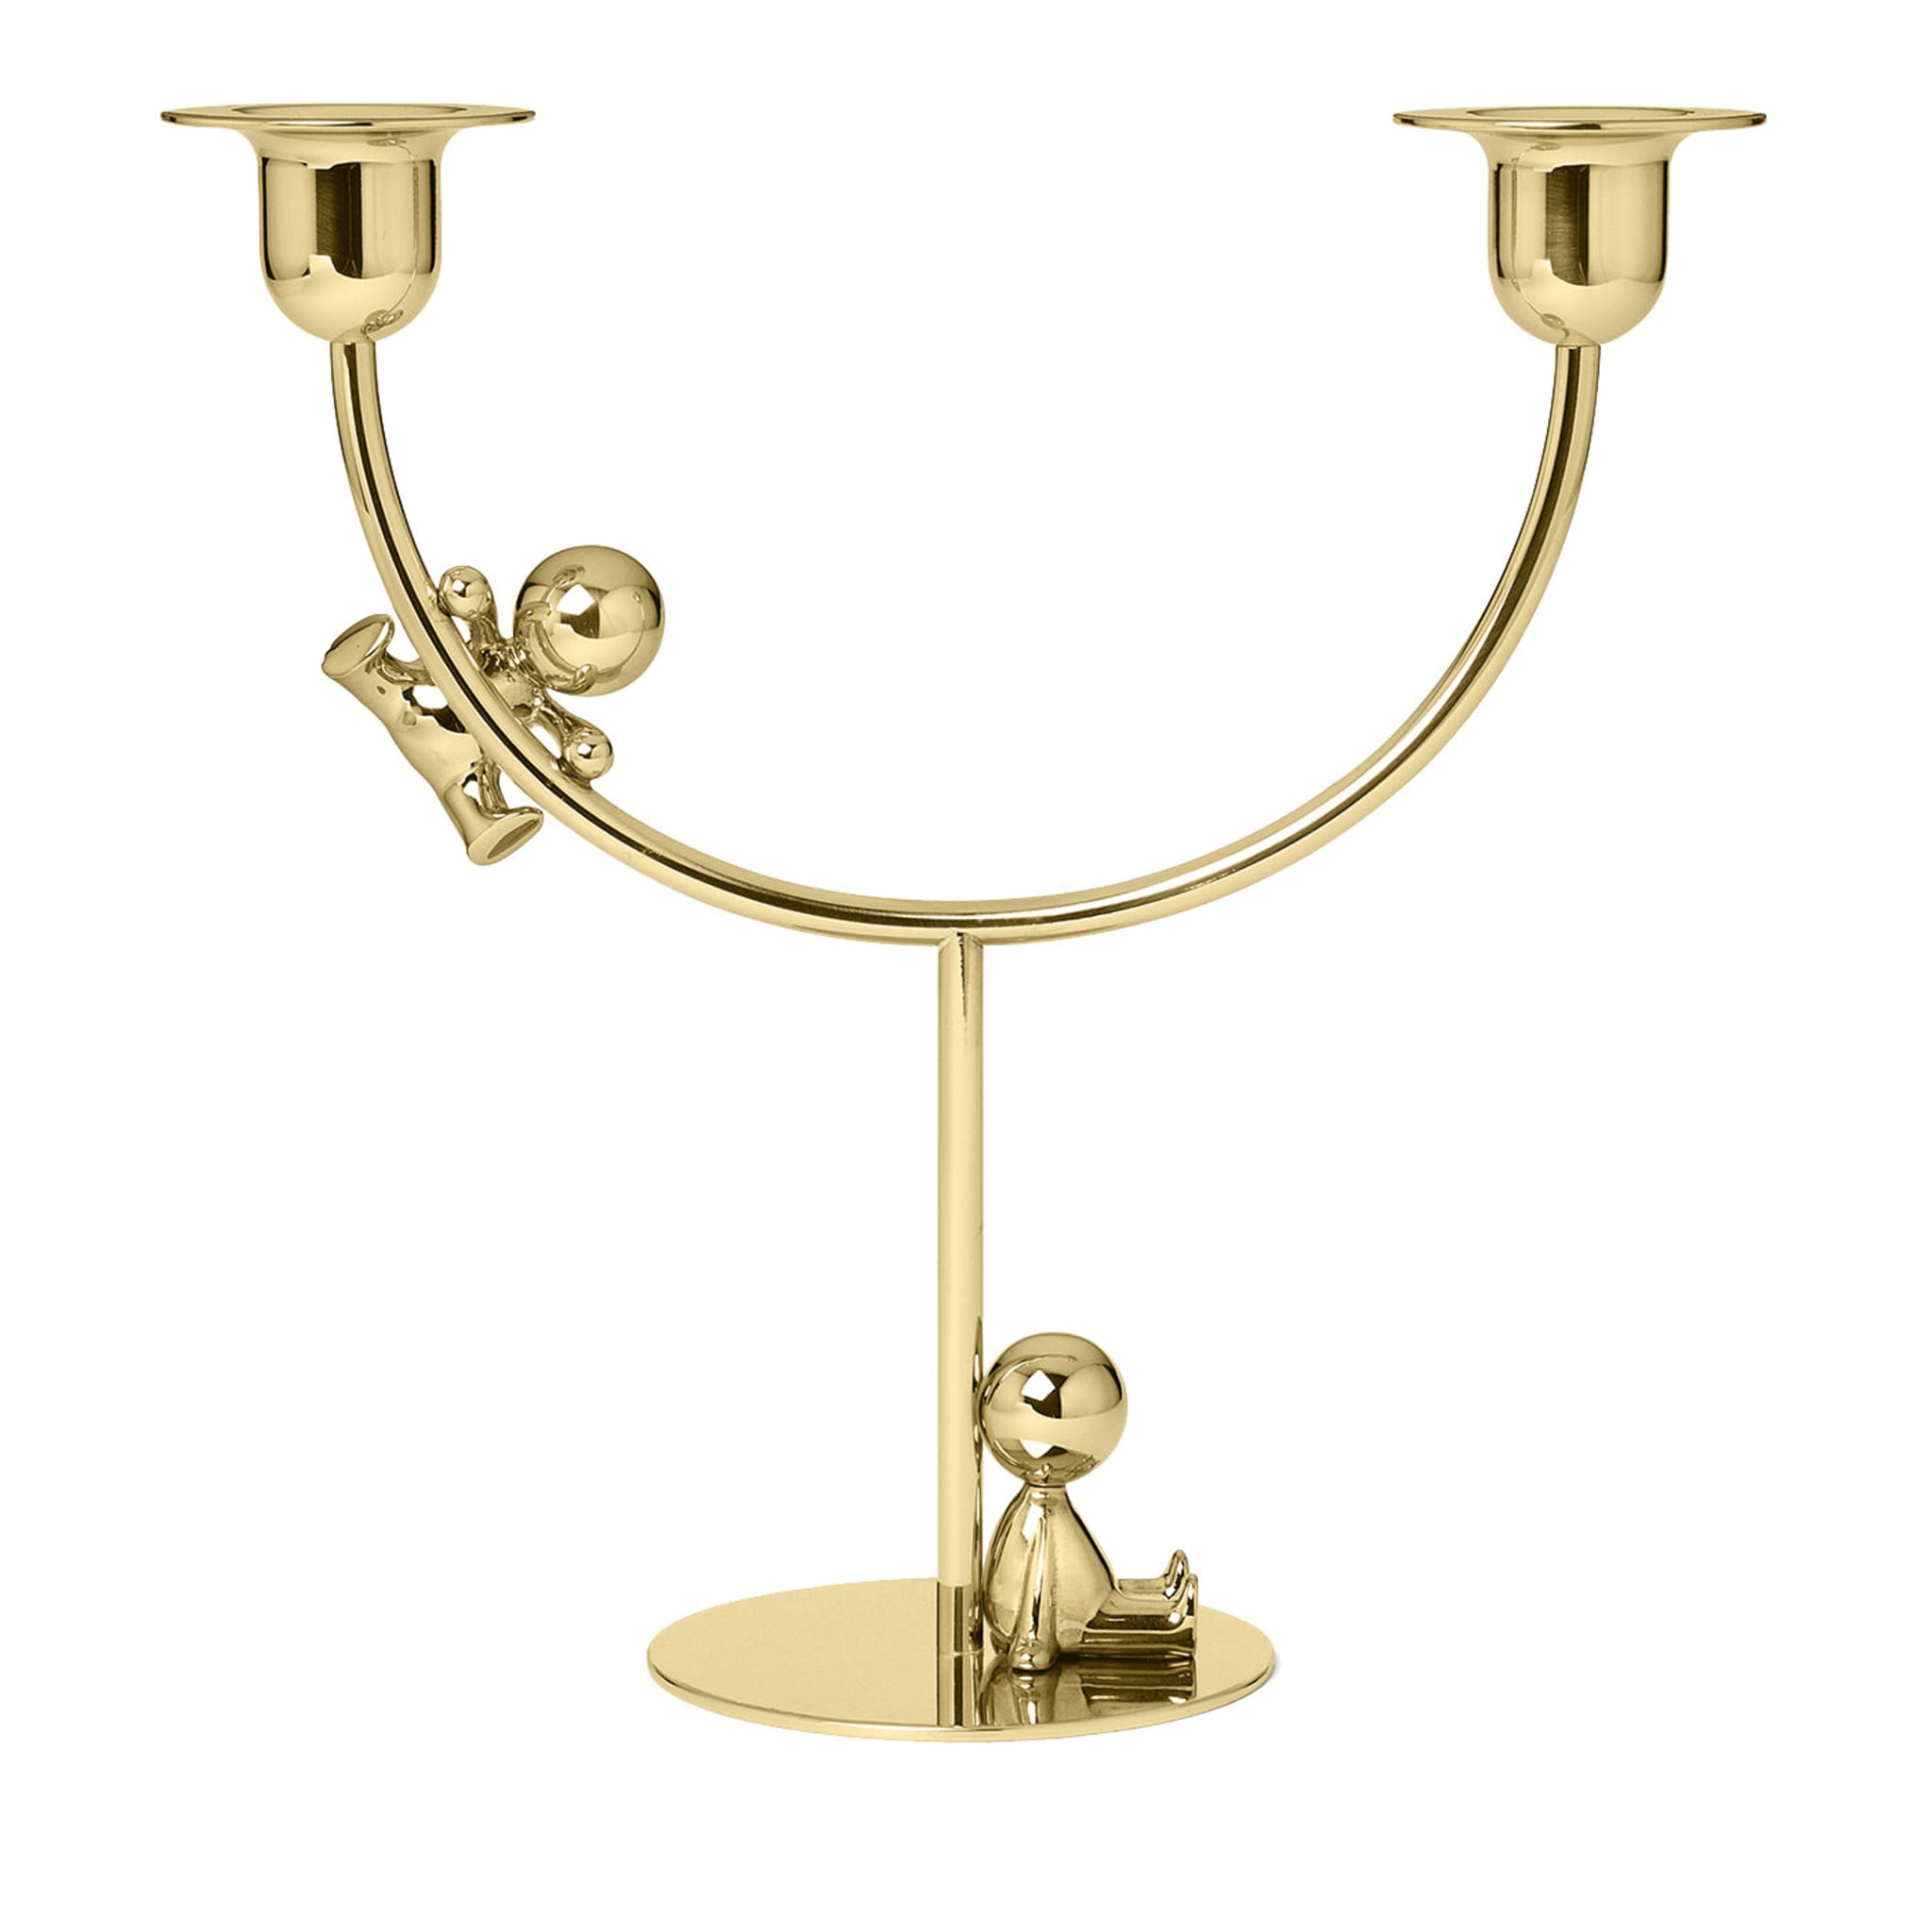 Omini Lazy Climber Candlestick in Polished Brass By Stefano Giovannoni - Main view